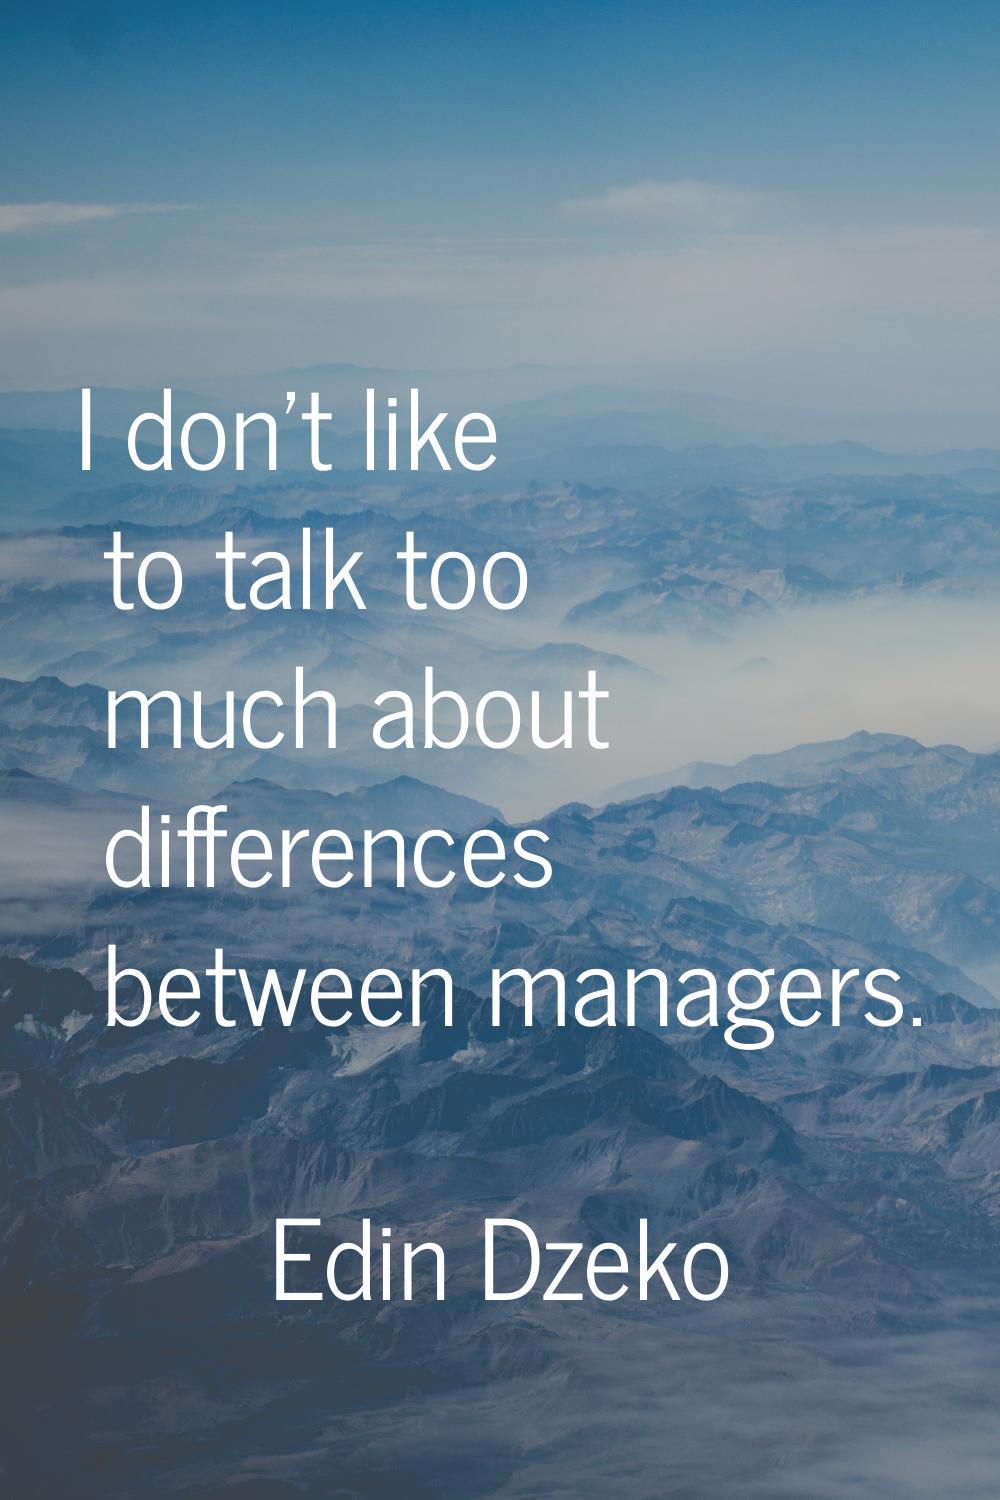 I don't like to talk too much about differences between managers.